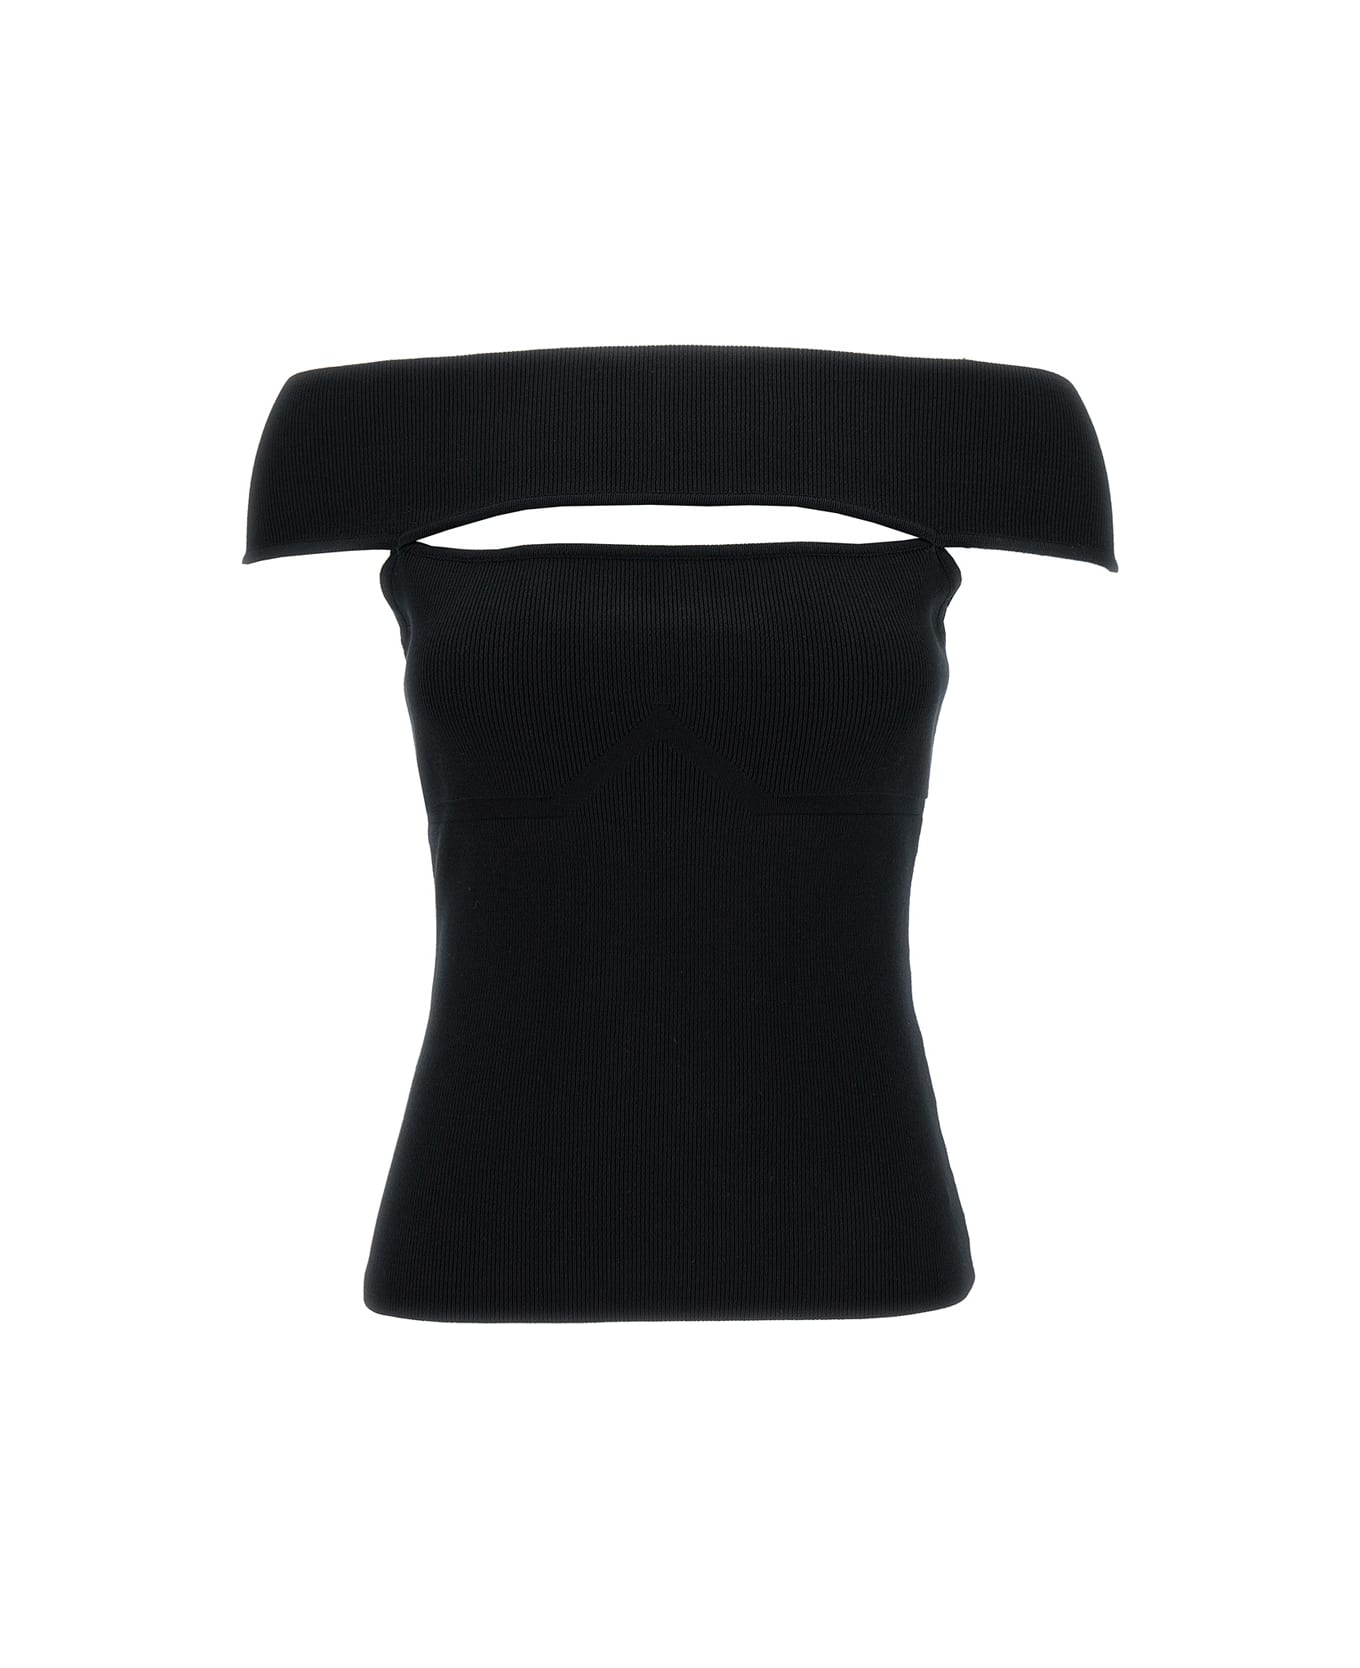 Federica Tosi Black Off-shoulder Top With Cut-out In Ribbed Viscose Blend Woman - Black